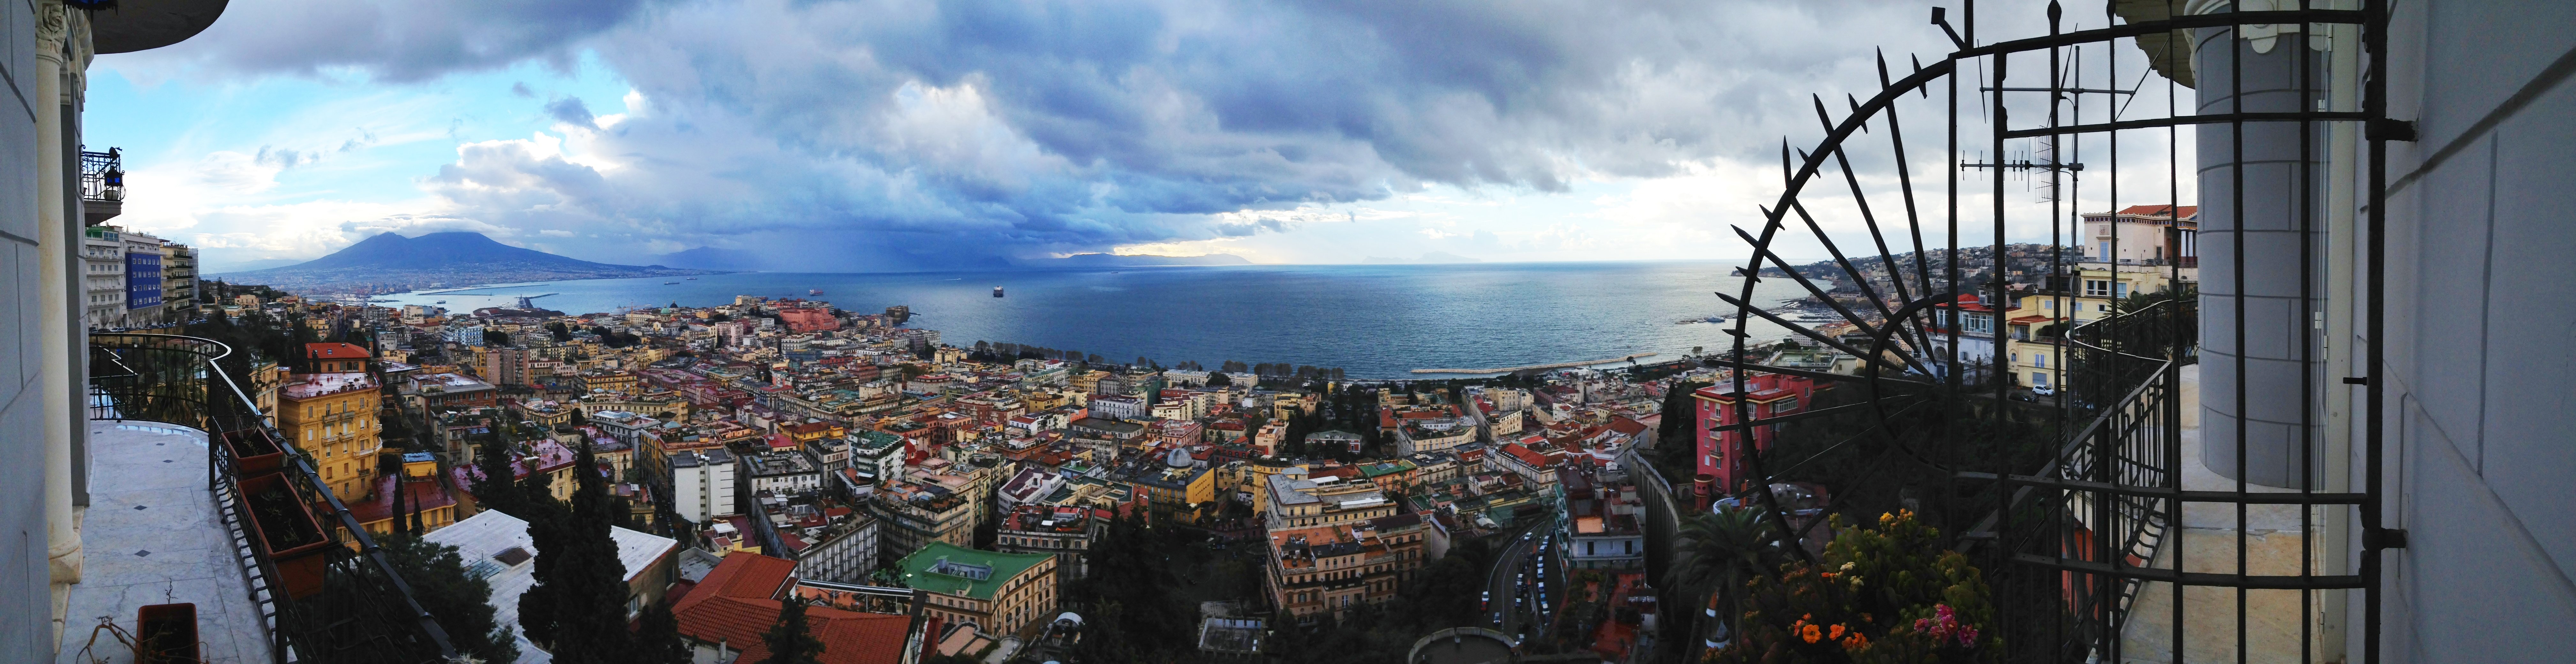 Man Made Naples HD Wallpaper | Background Image